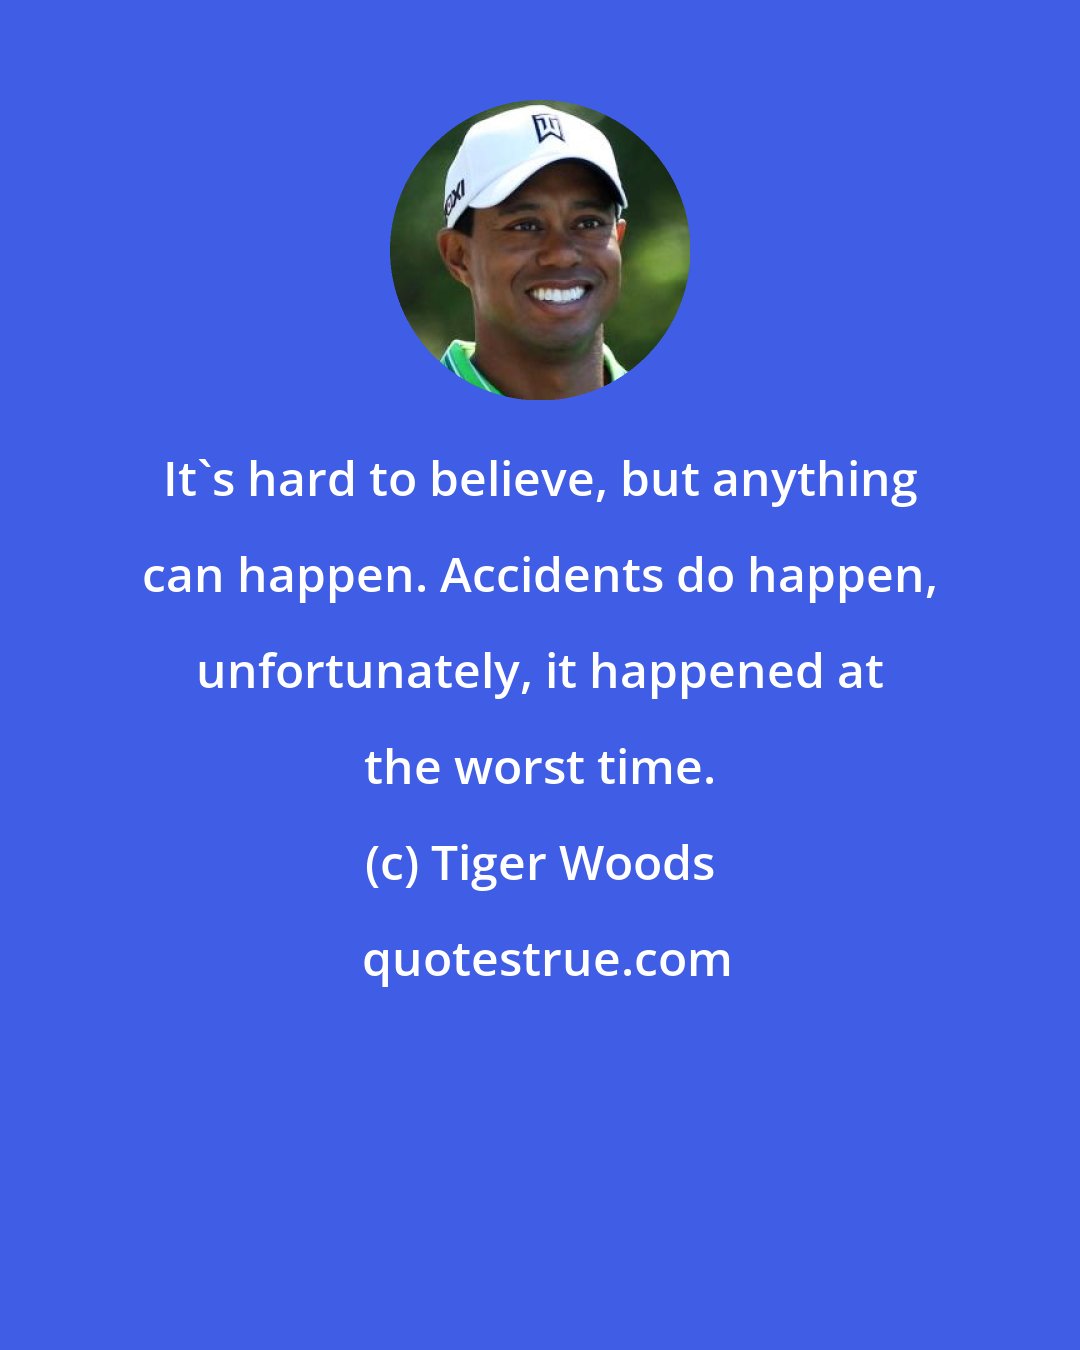 Tiger Woods: It's hard to believe, but anything can happen. Accidents do happen, unfortunately, it happened at the worst time.